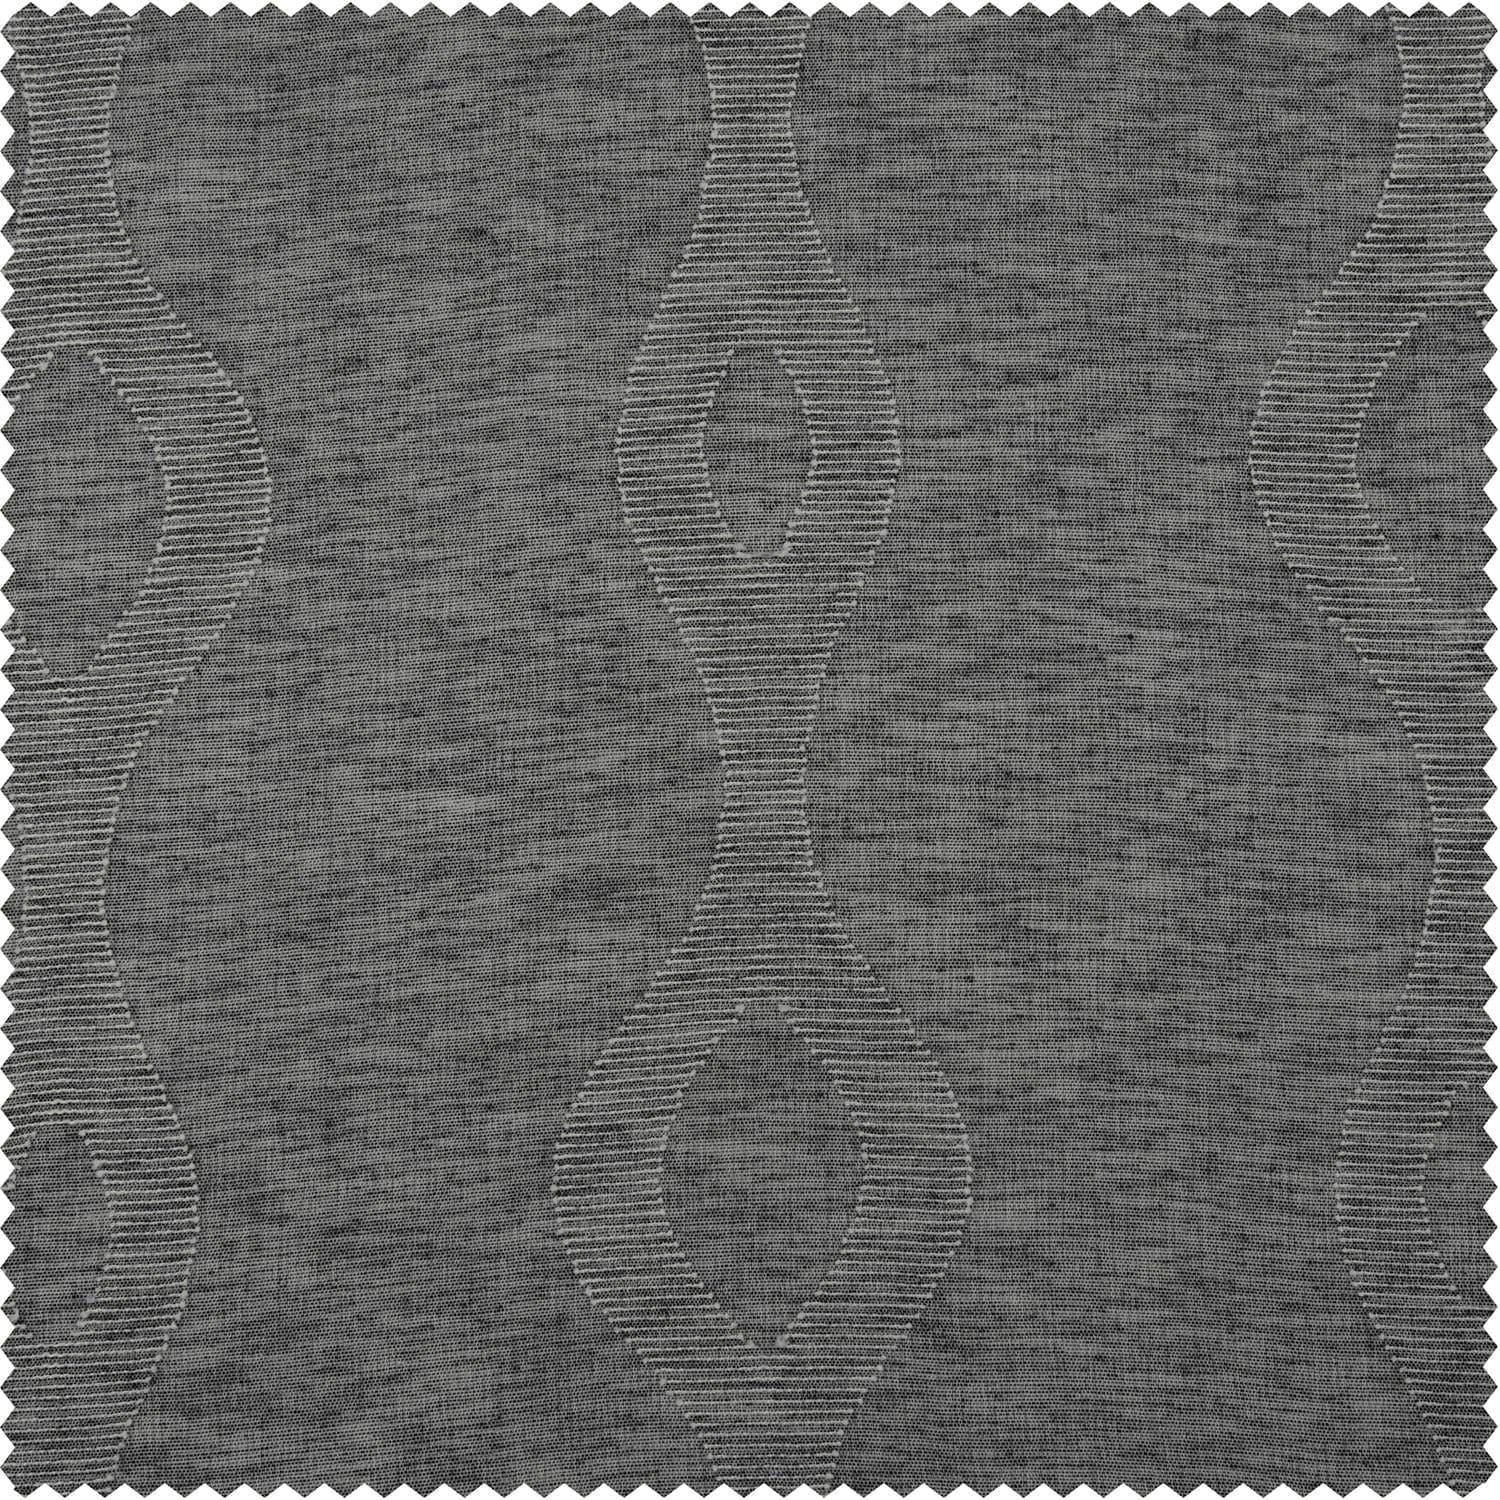 Vega Charcoal Patterned Faux Linen Sheer Curtain